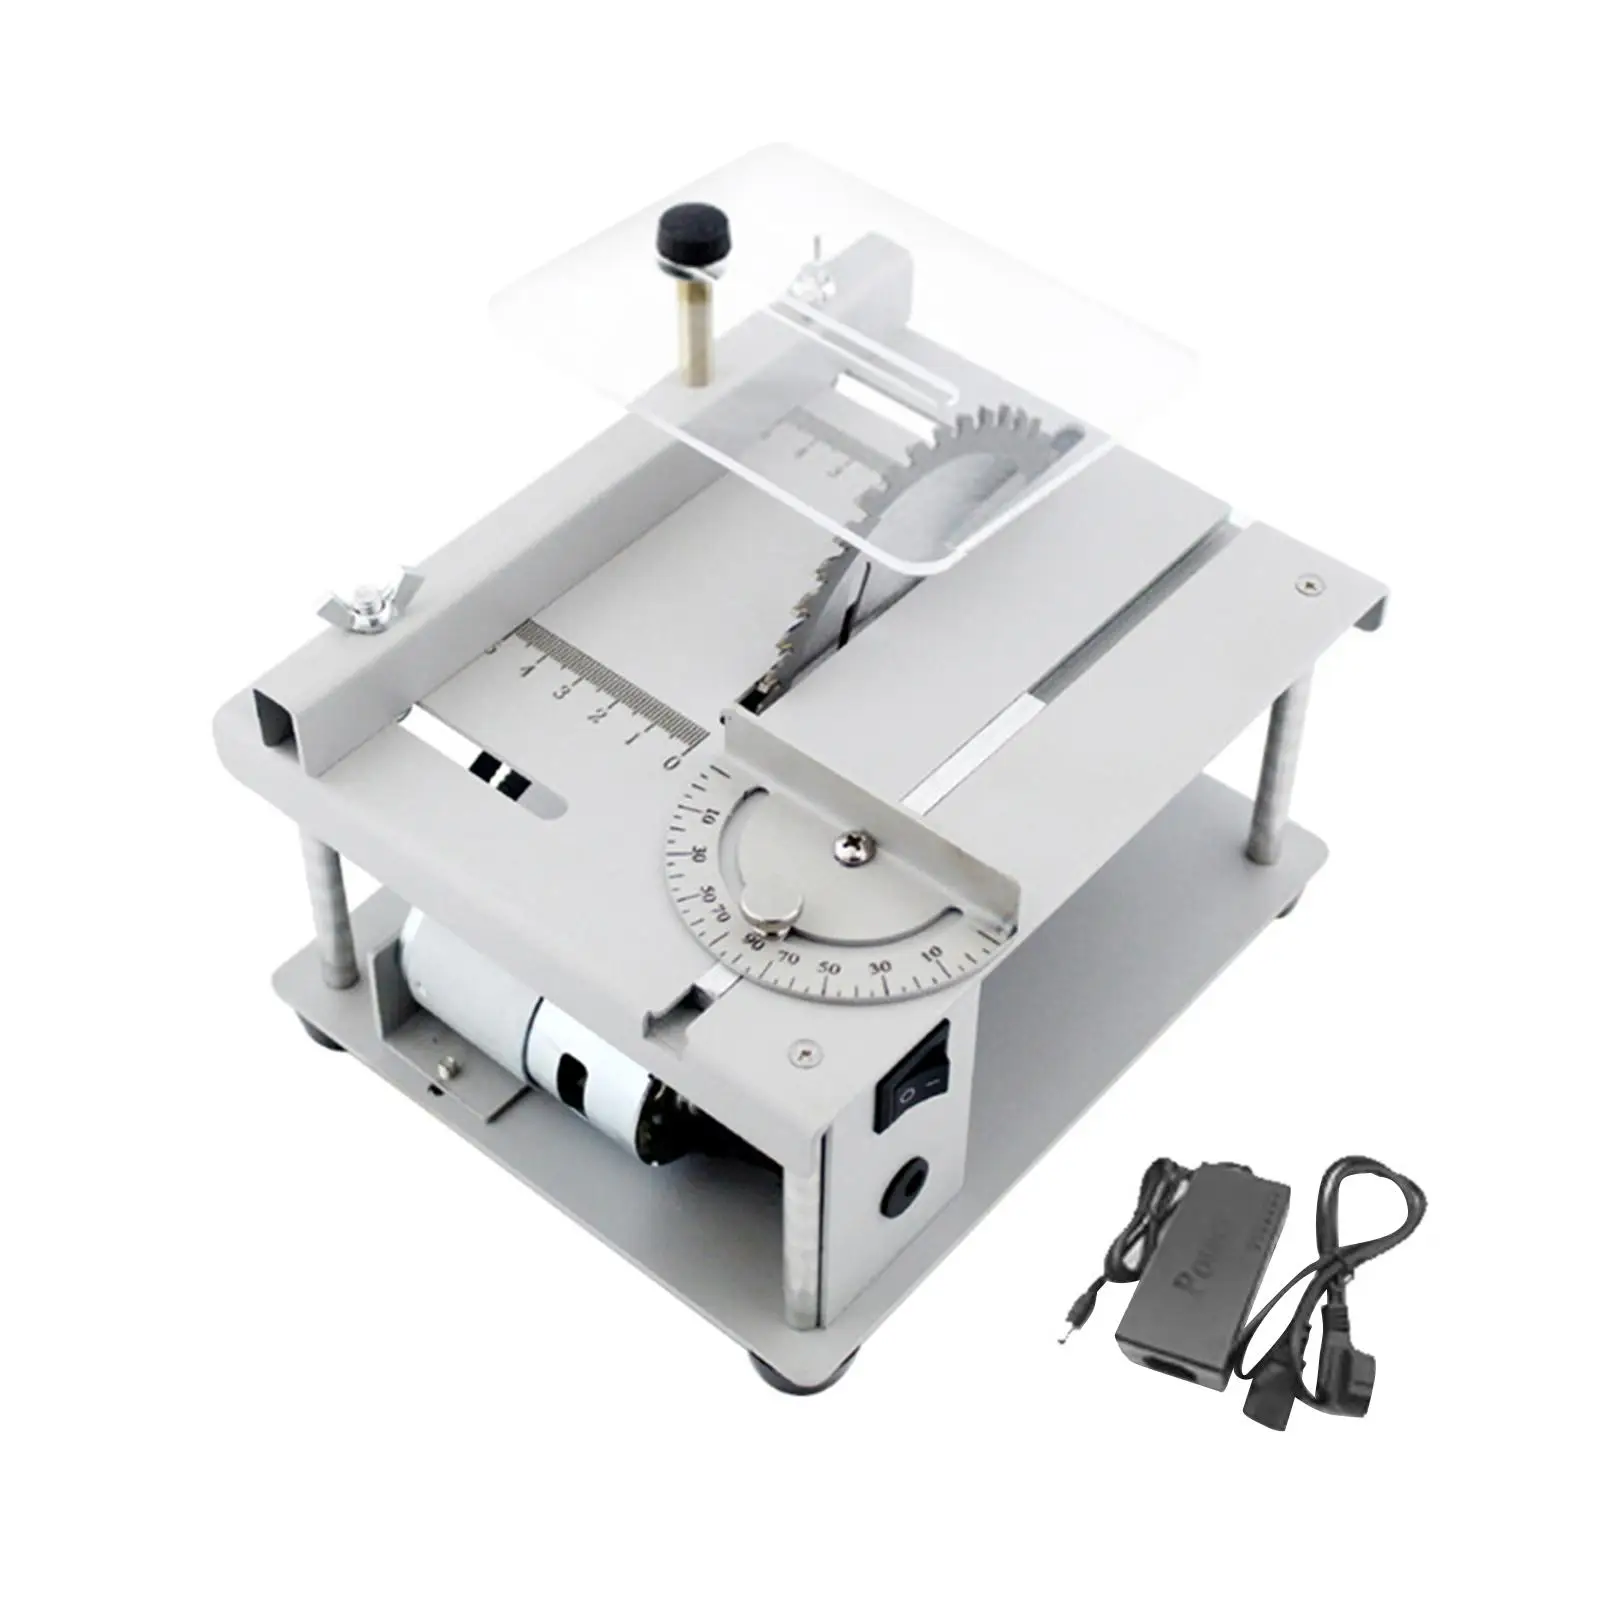 Woodworking Bench Saw DIY Model Crafts Cutting Tool Grinding Tool DIY Wood Acrylic Handmade Mini Table Saw for Wood Crafts Metal